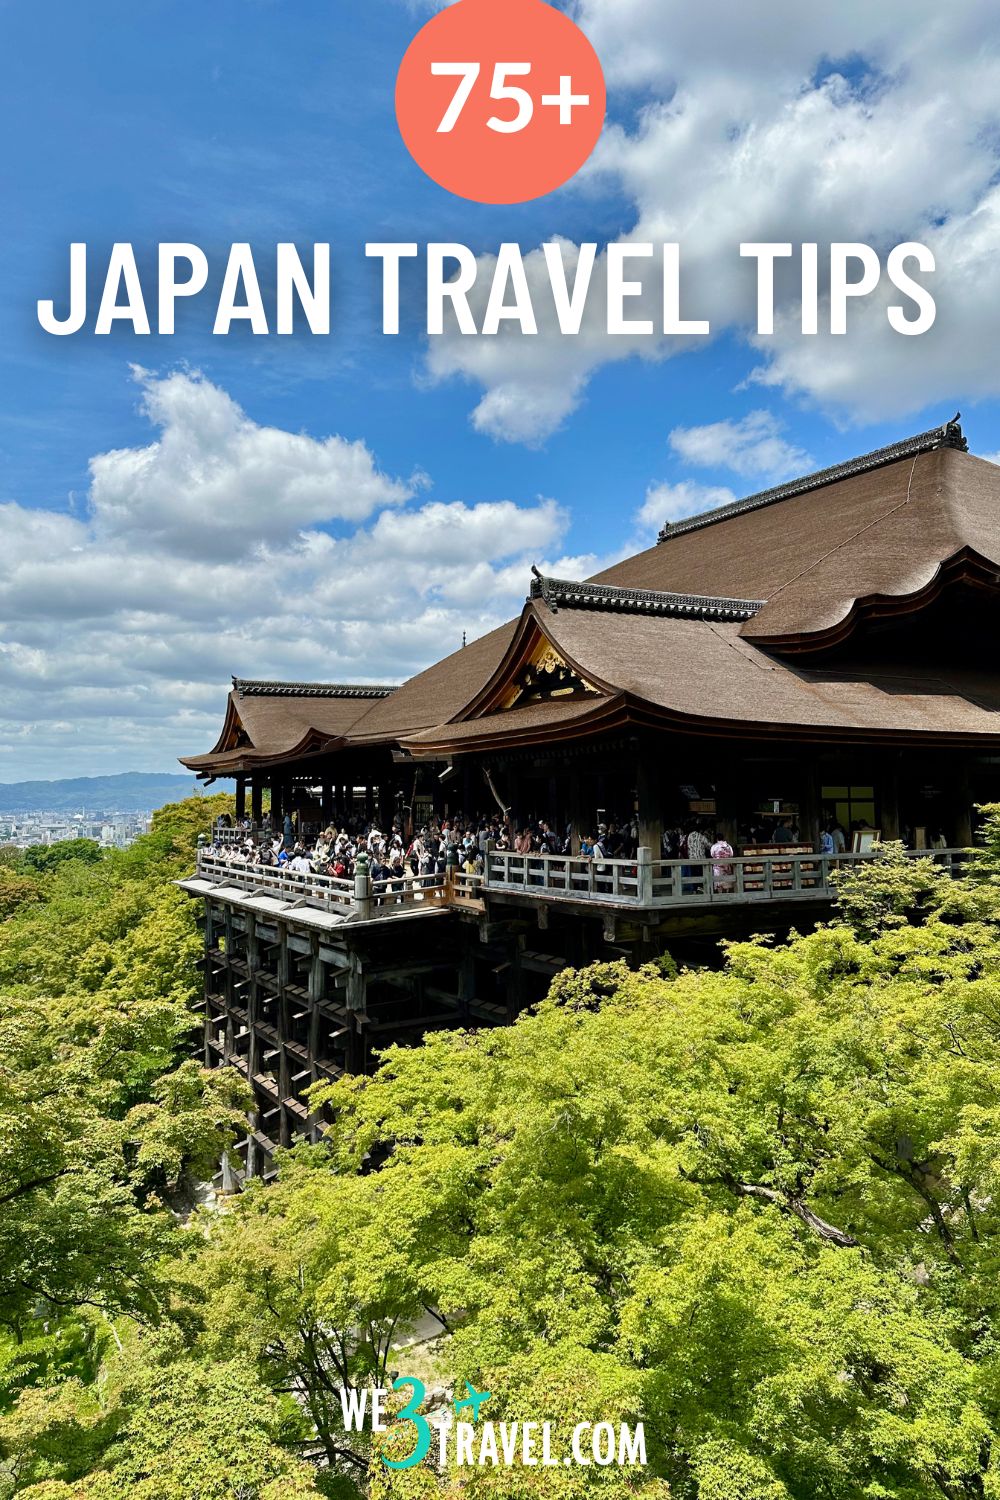 Planning a trip to Japan? These Japan travel tips will help you get over any culture shock and be prepared to fully enjoy your Japan vacation.